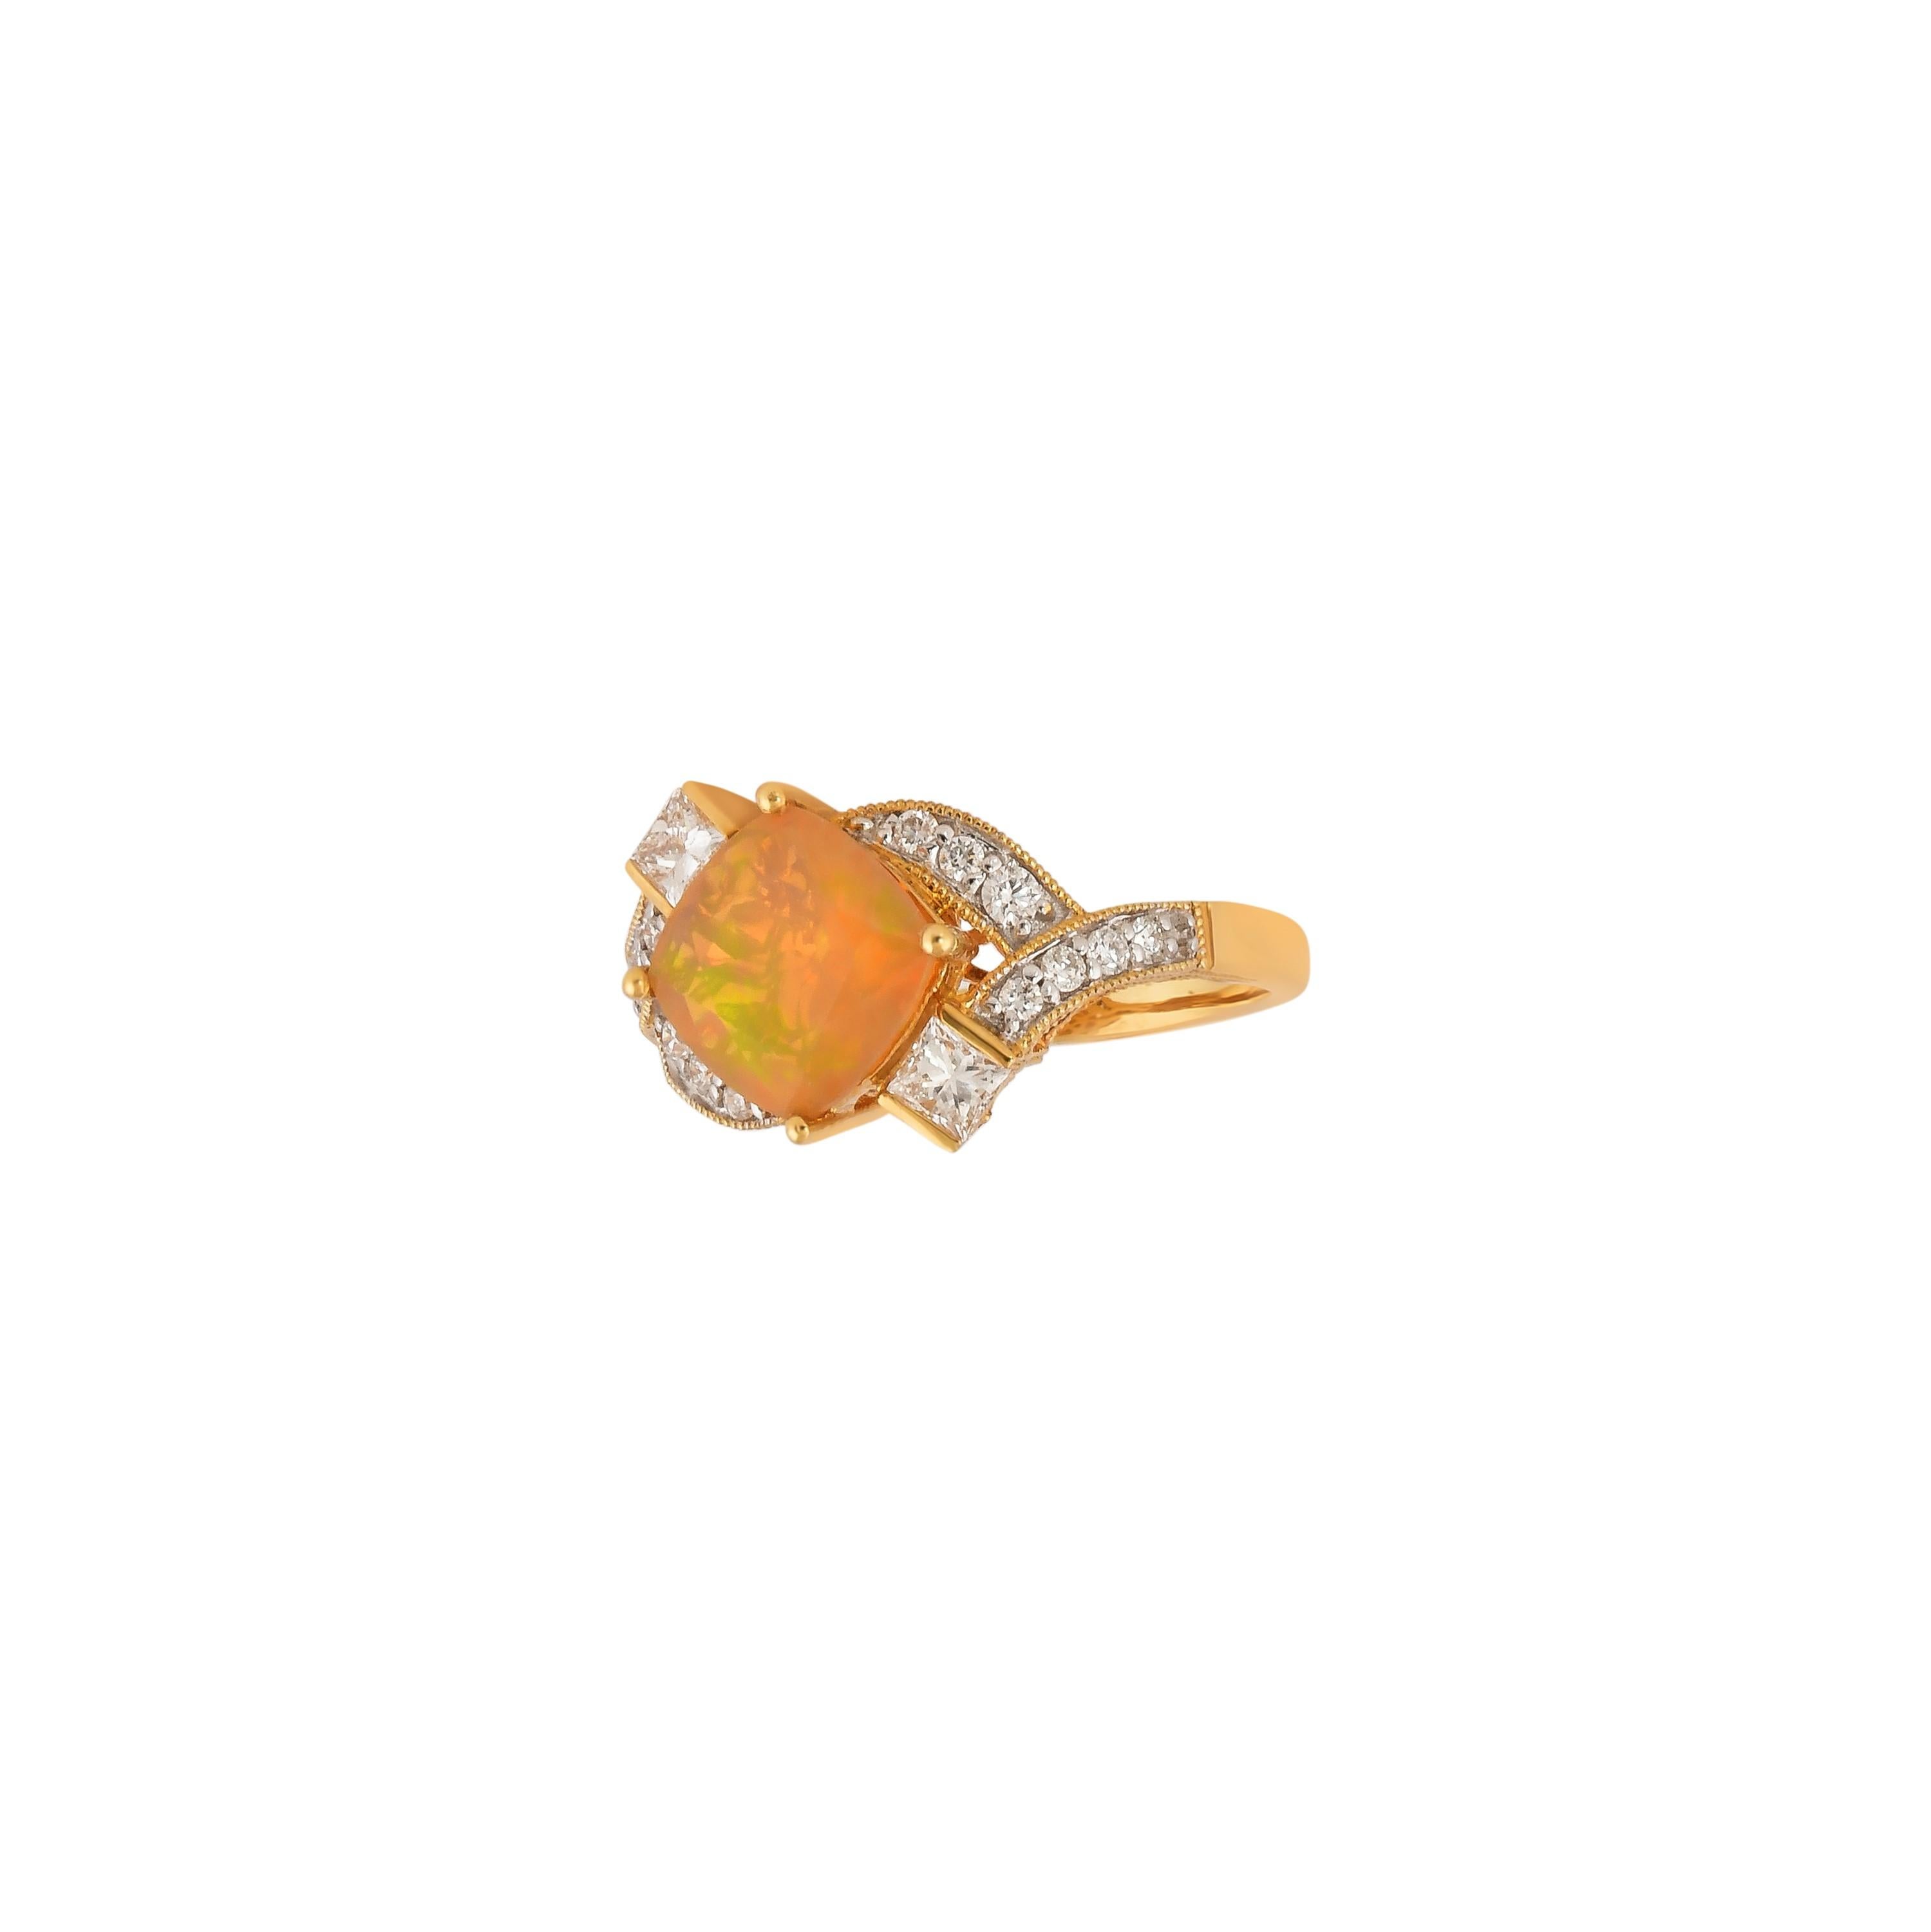 Contemporary 1.4 Carat Ethiopian Opal with Diamond Ring in 18 Karat Yellow Gold For Sale